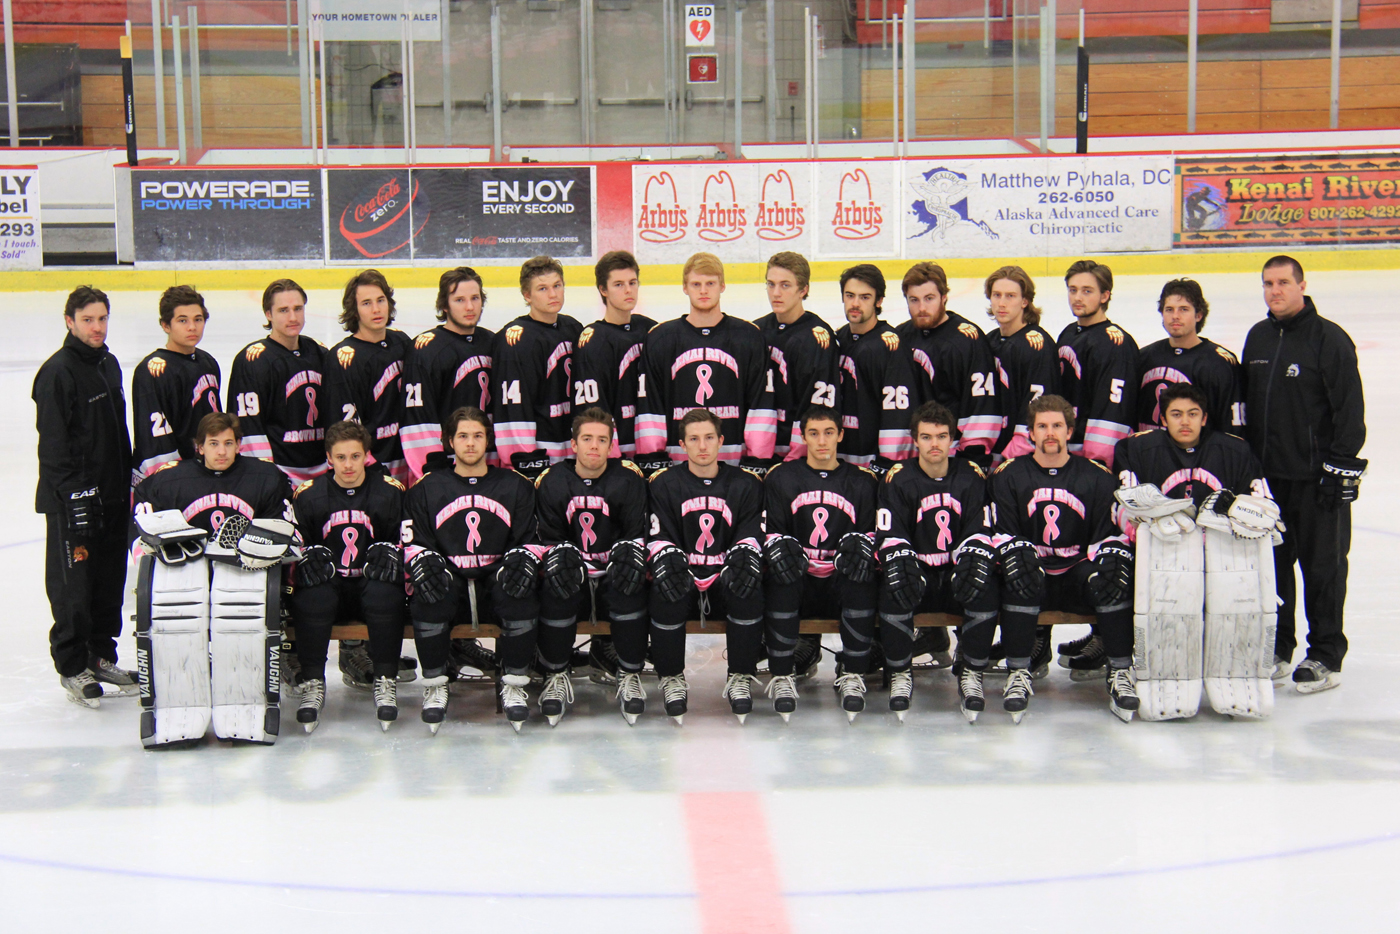 The Brown Bears don pink jerseys for “Pink In the Rink,” an event to help raise cancer awareness.-Photo provided